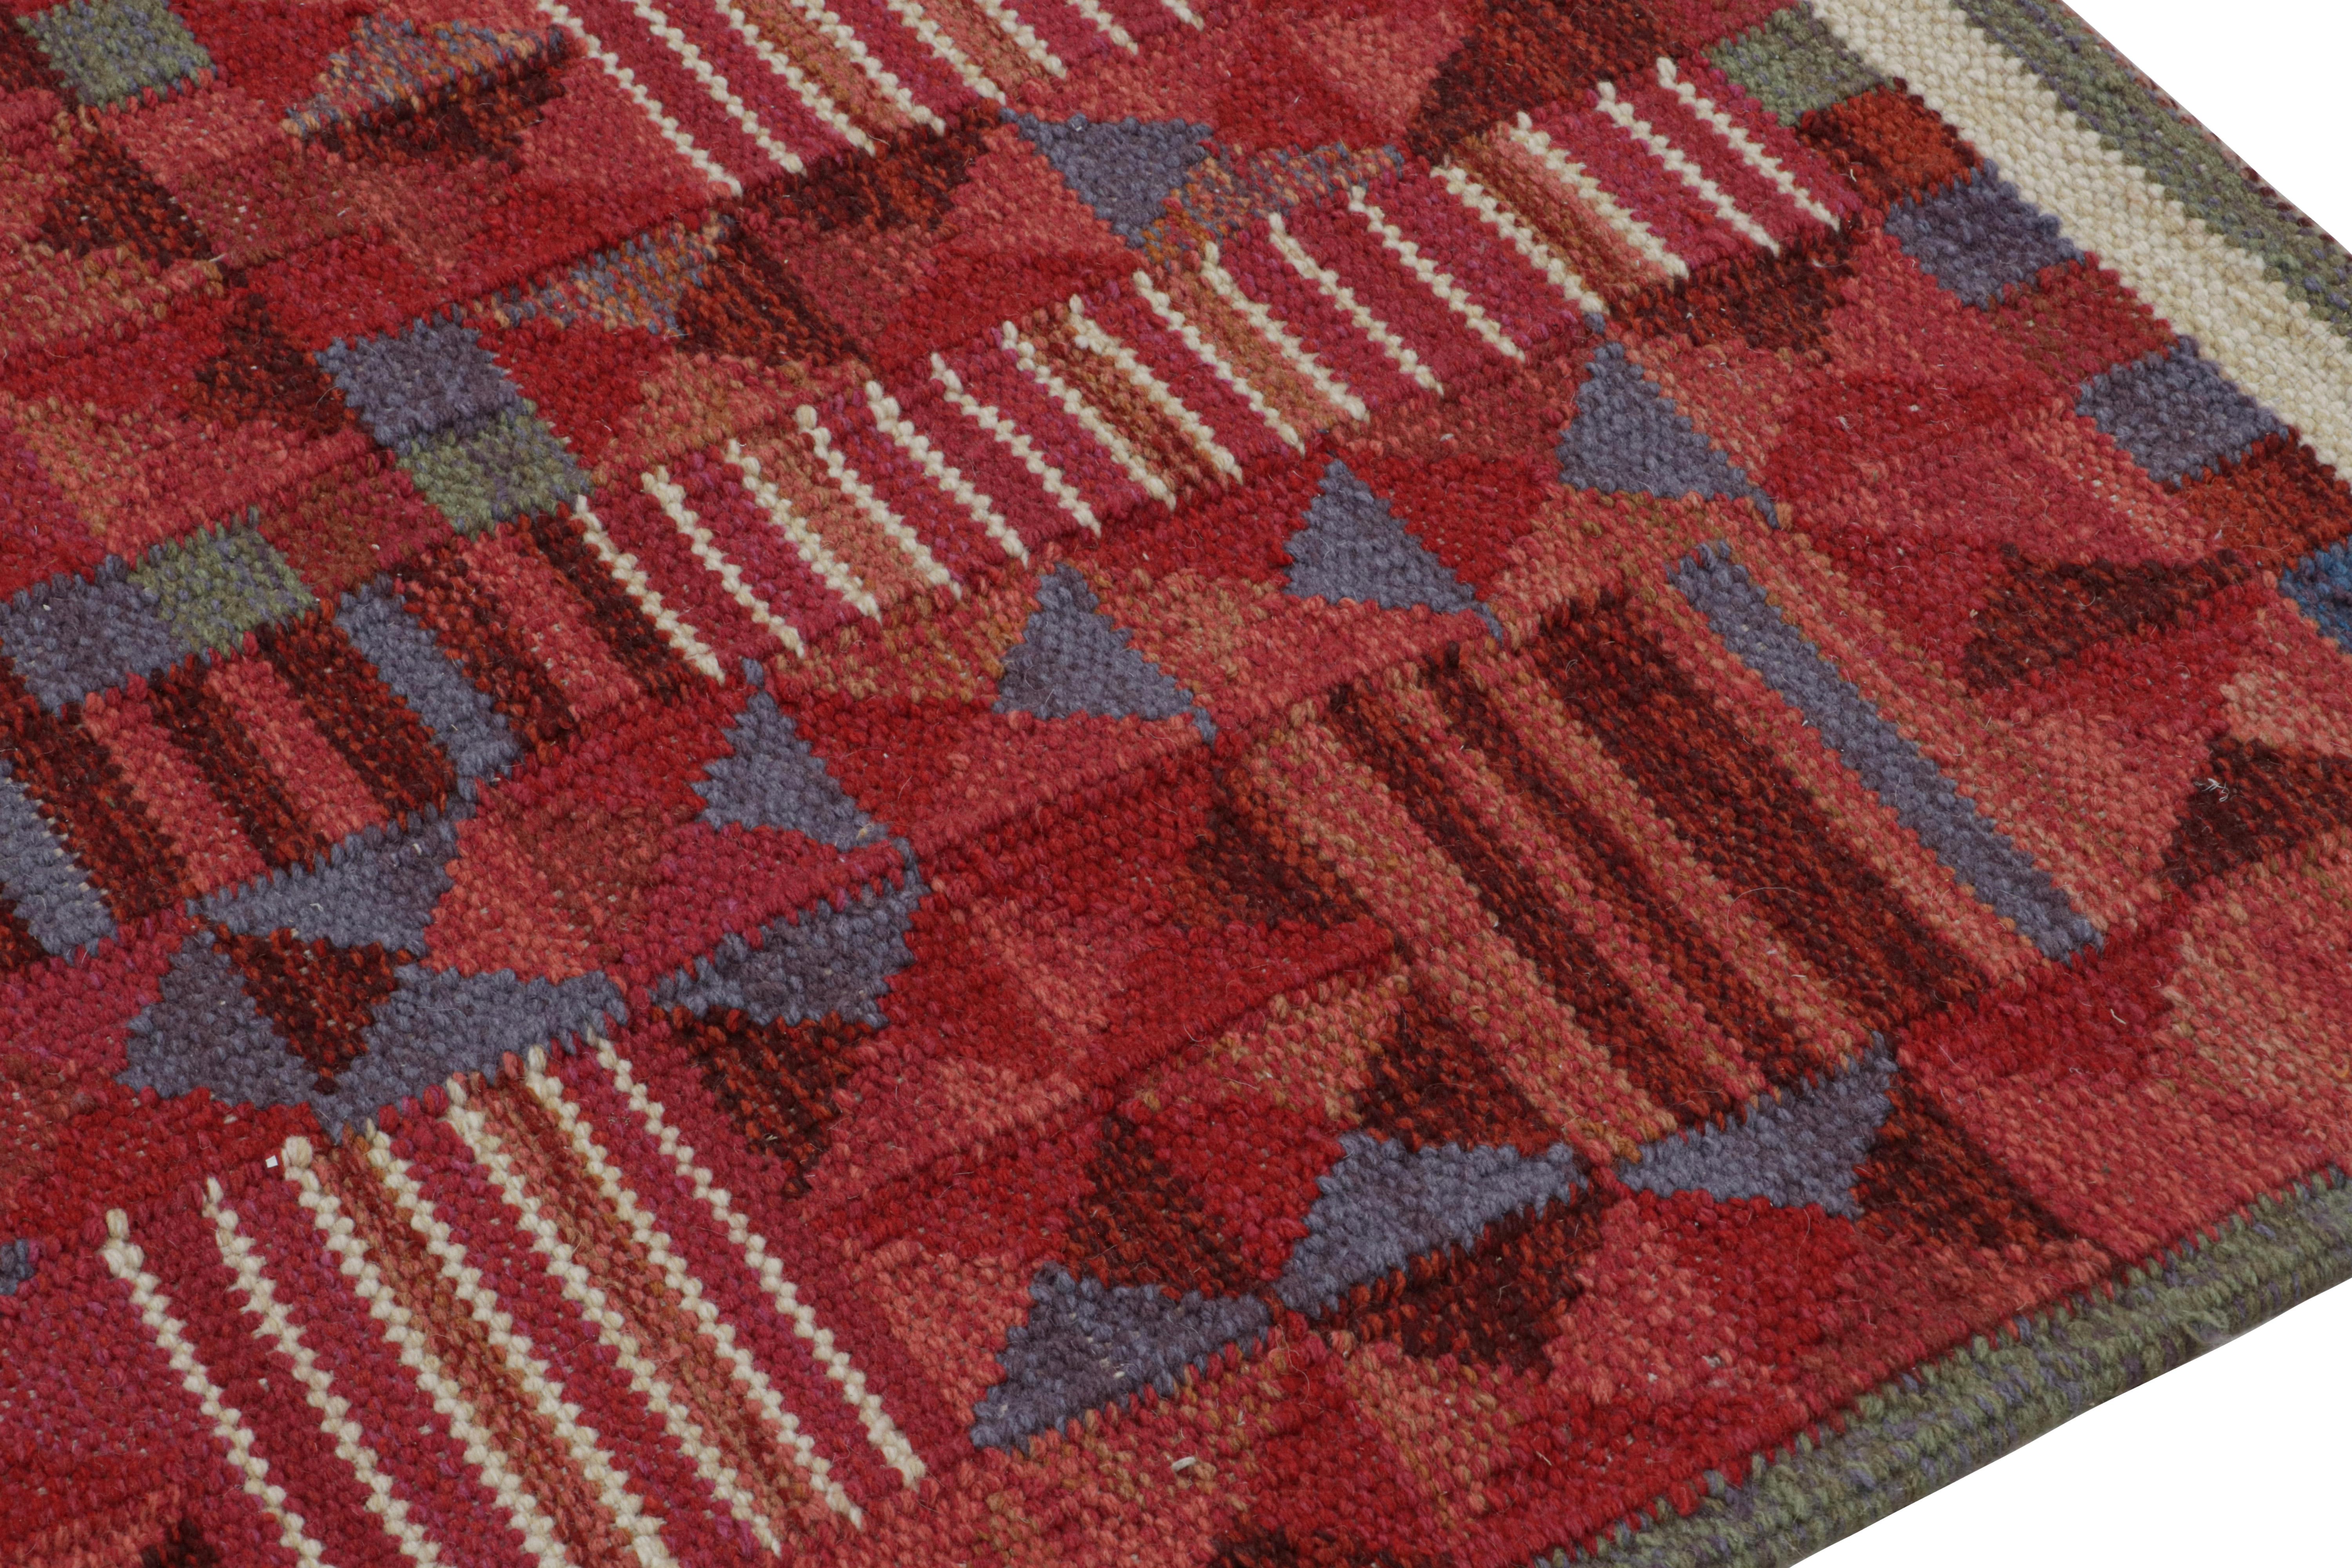 Hand-Woven Rug & Kilim’s Scandinavian Style Custom Kilim Rug in Red with Geometric Patterns For Sale